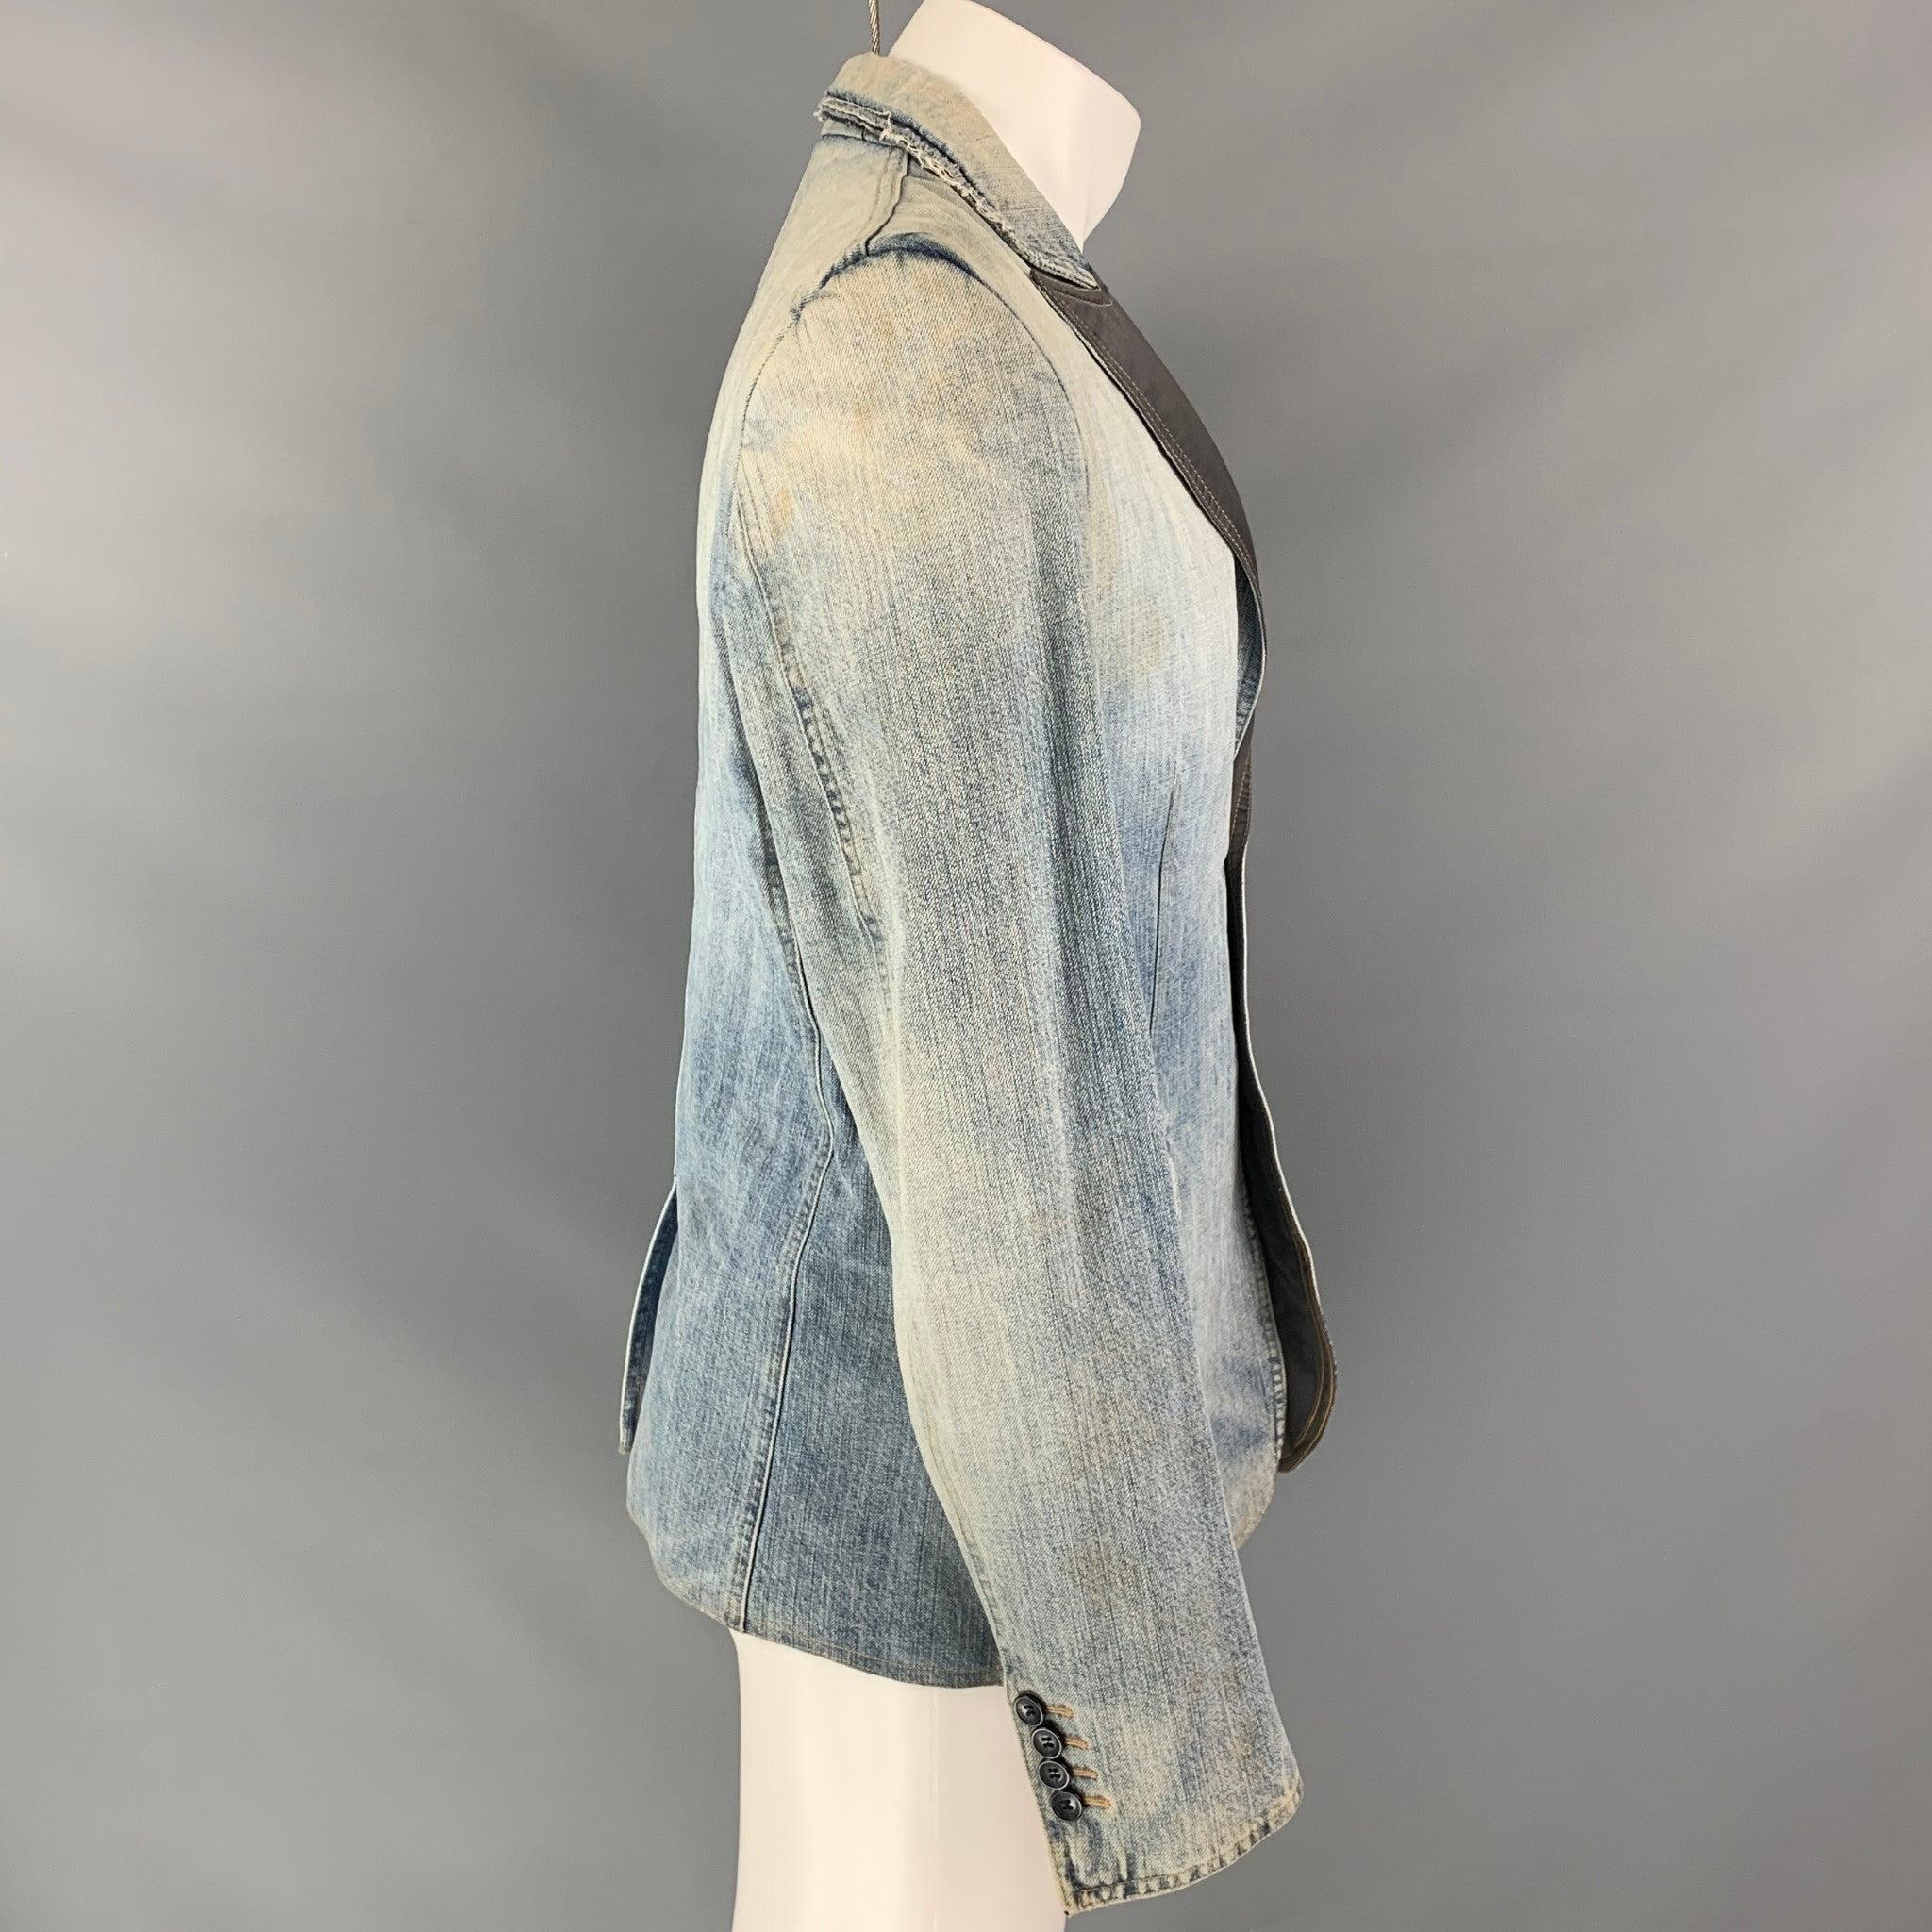 D&G by DOLCE & GABBANA Size 40 Blue Distressed Denim Jacket In Good Condition For Sale In San Francisco, CA